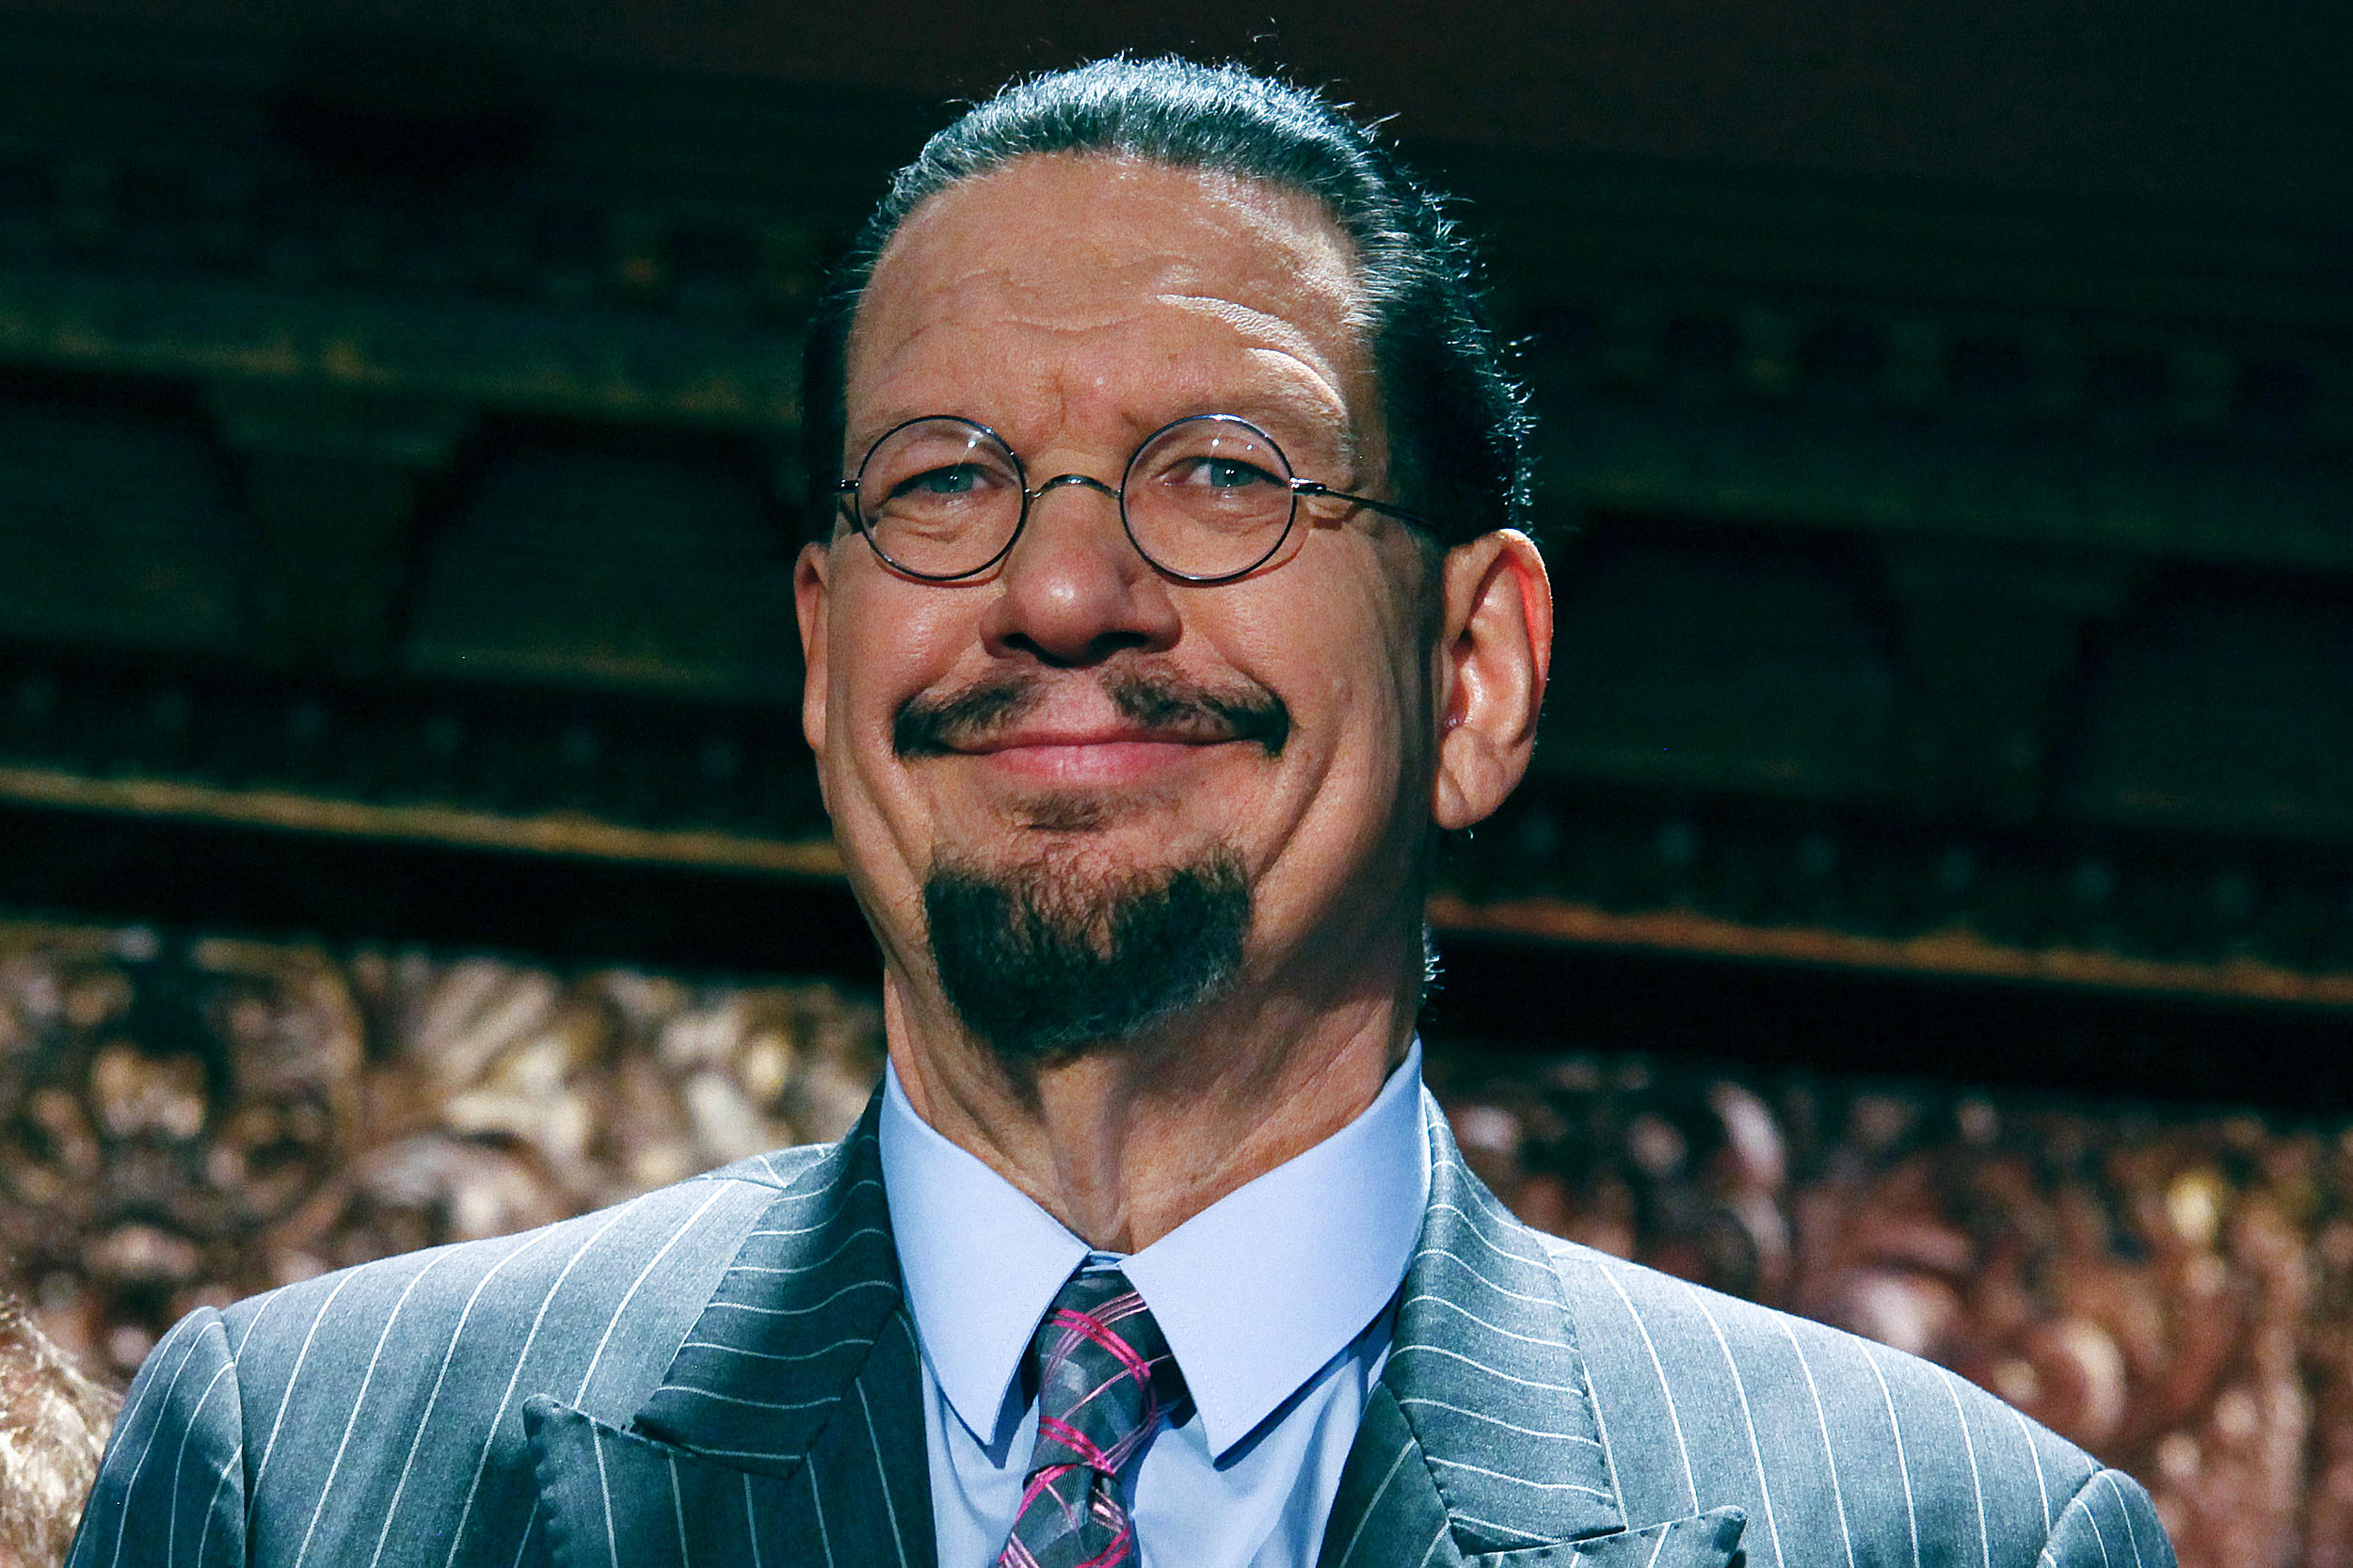 Penn Jillette makes surprise call to NJ 101.5 about magic today